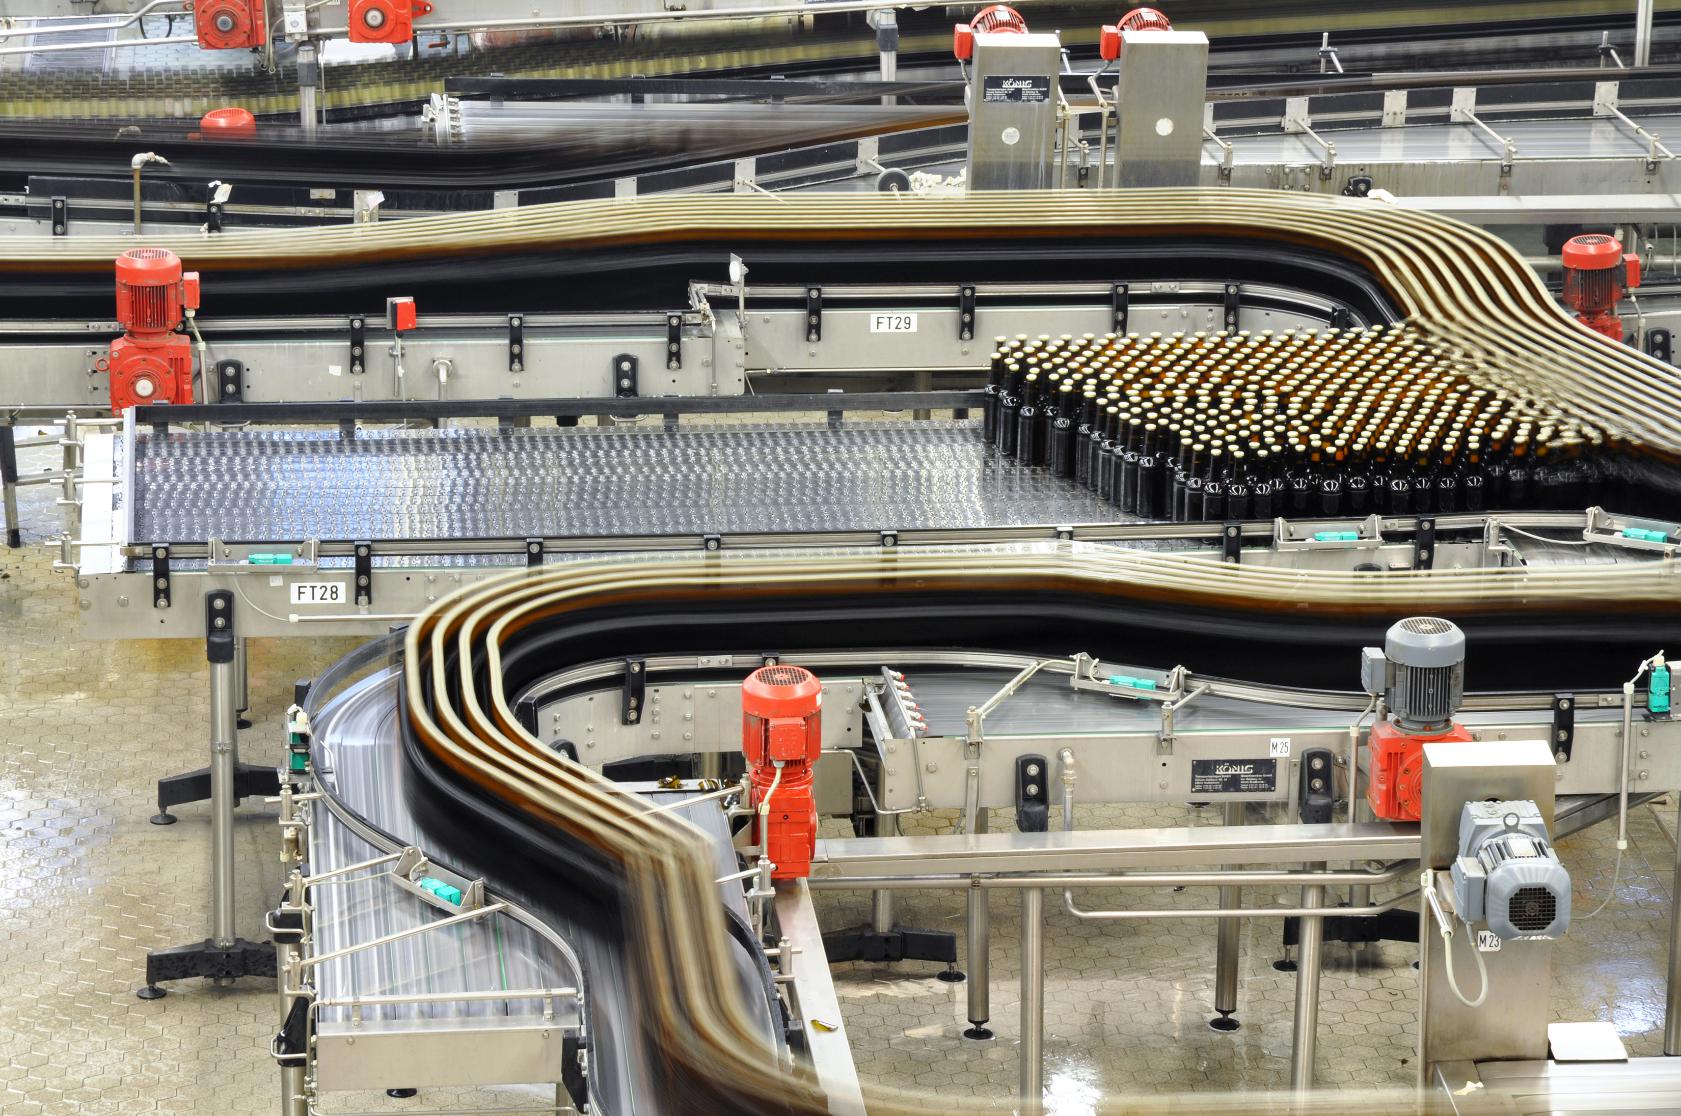 Conveyer belt in facility